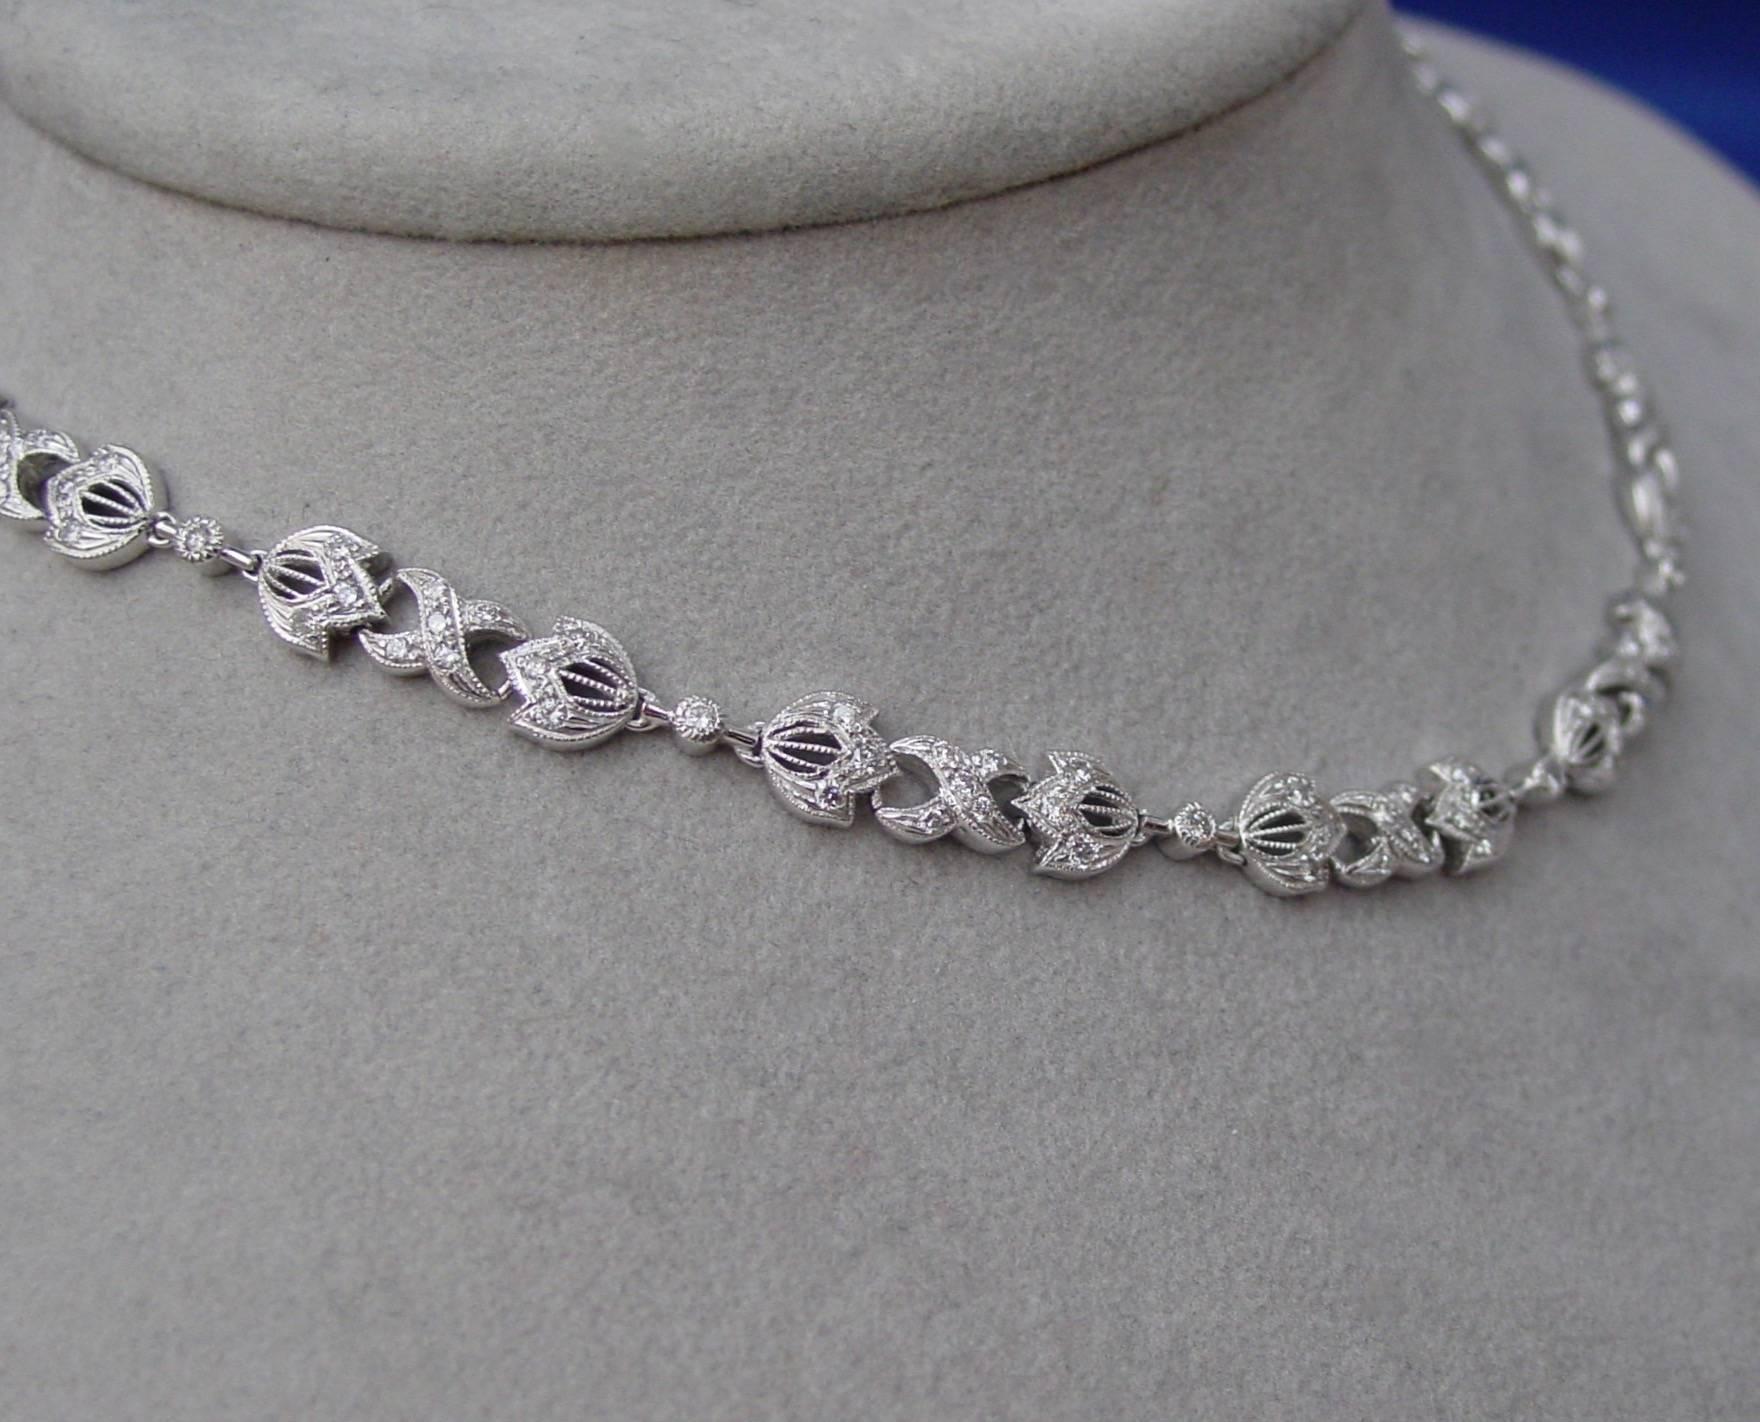 A platinum and diamond necklace featuring approximately 5.05 carats of round brilliant diamonds highlighted by delicate millgraining. Lovely.